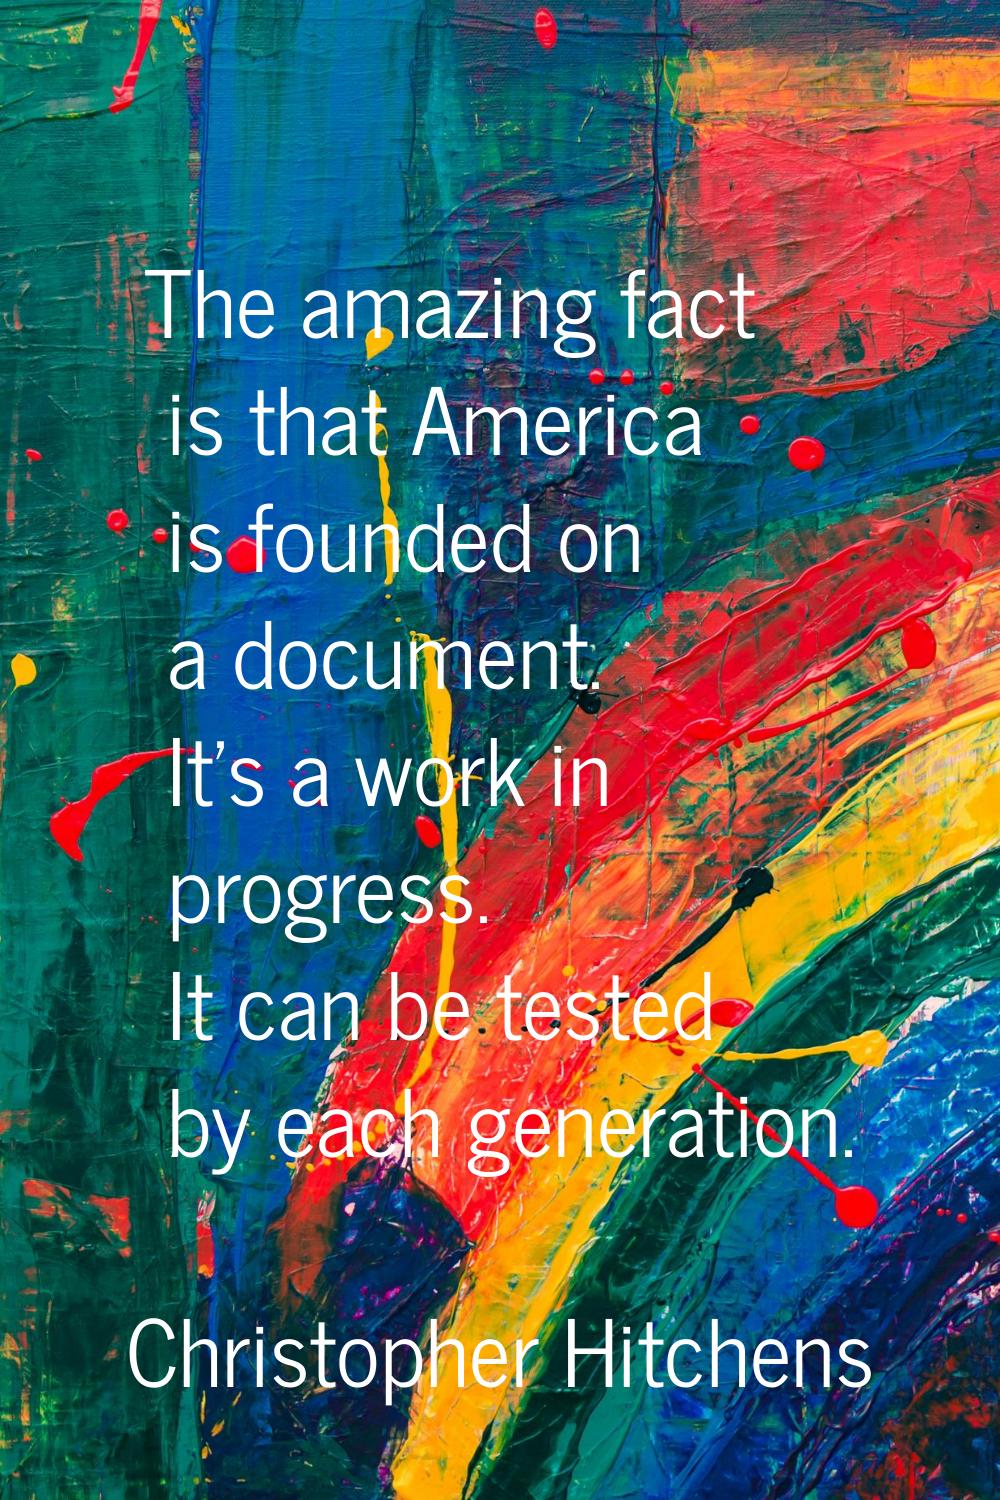 The amazing fact is that America is founded on a document. It's a work in progress. It can be teste